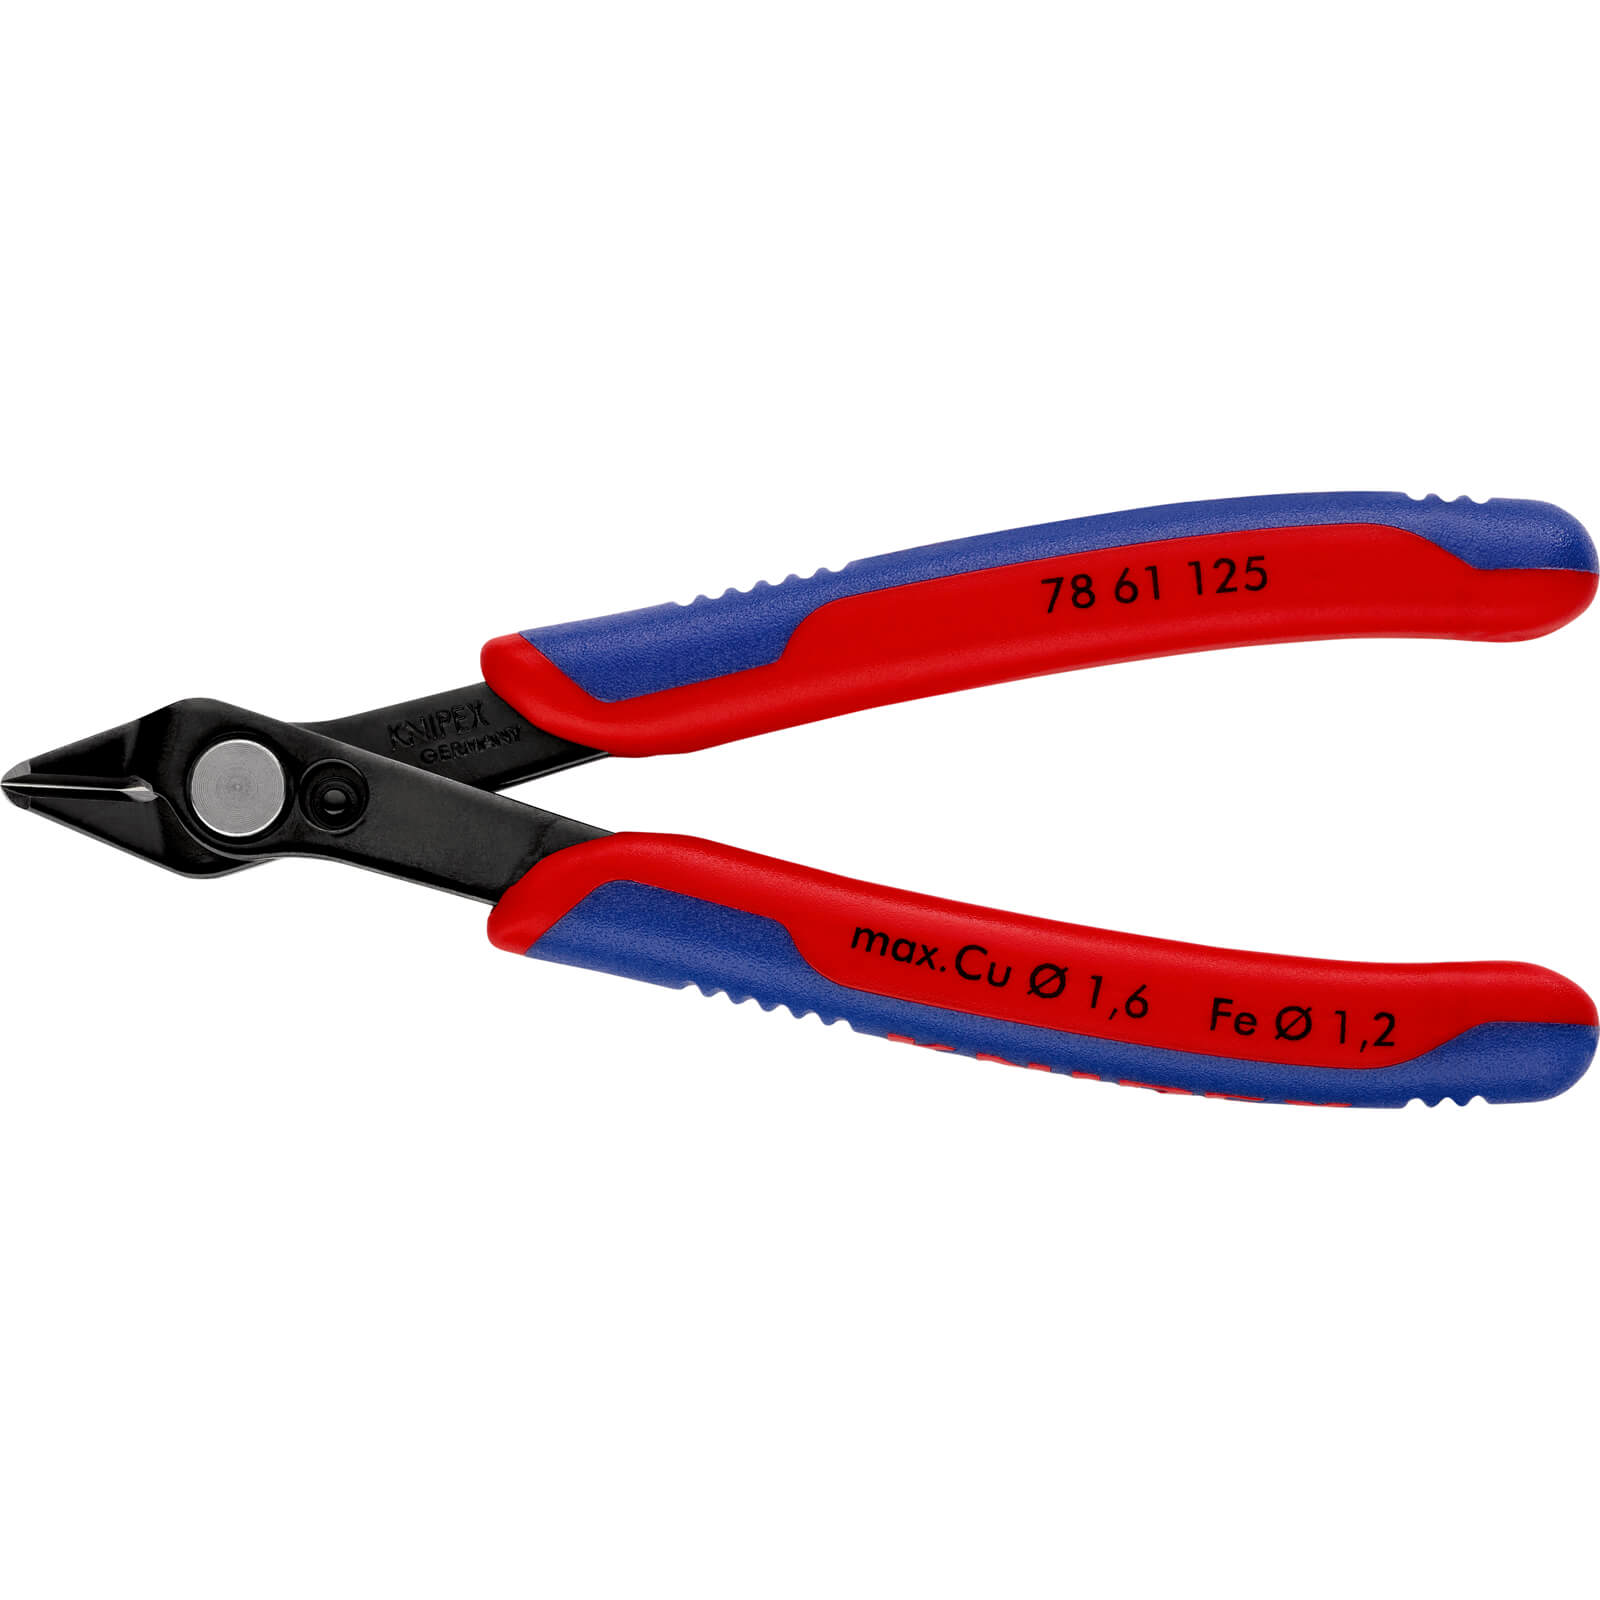 Image of Knipex 78 61 Electronics Super Knips Pliers 125mm